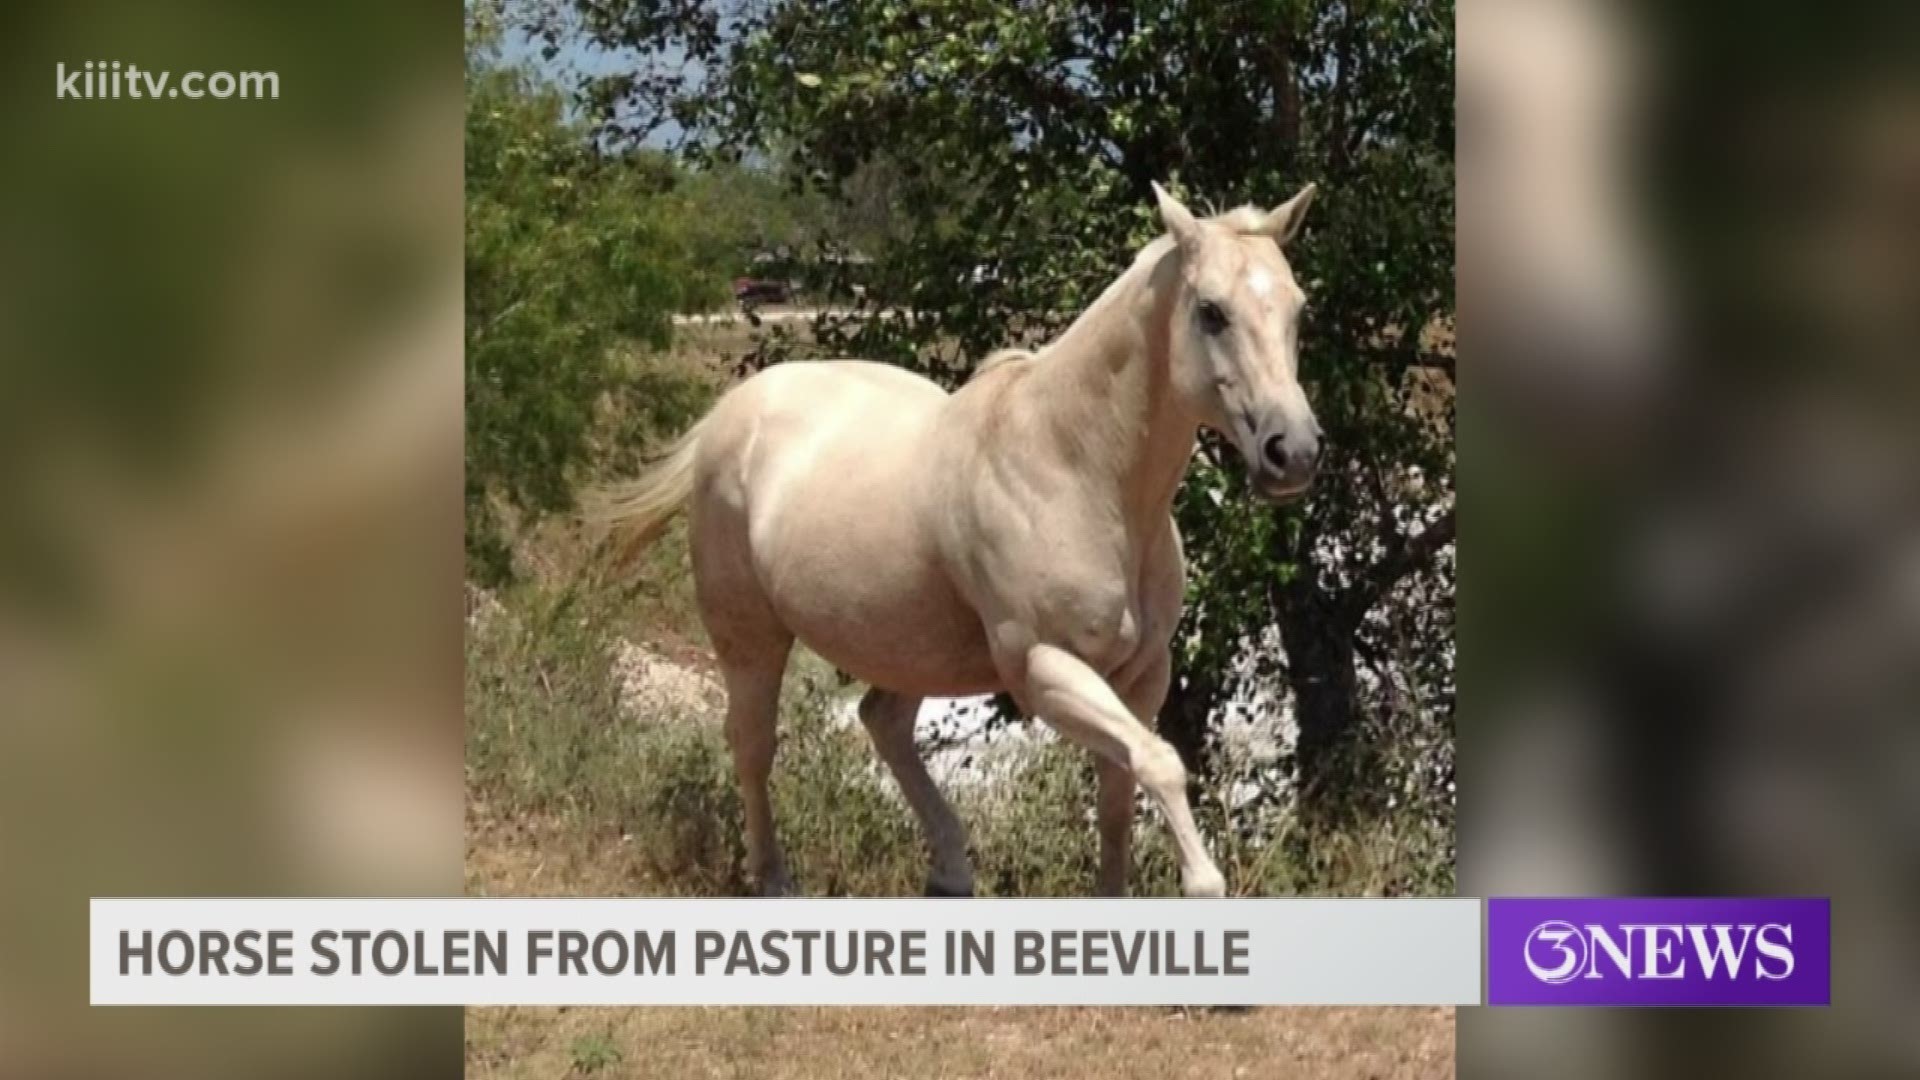 A Beeville, Texas, woman is desparately searching for her horse. She believes it was stolen from her pasture sometime on Monday.